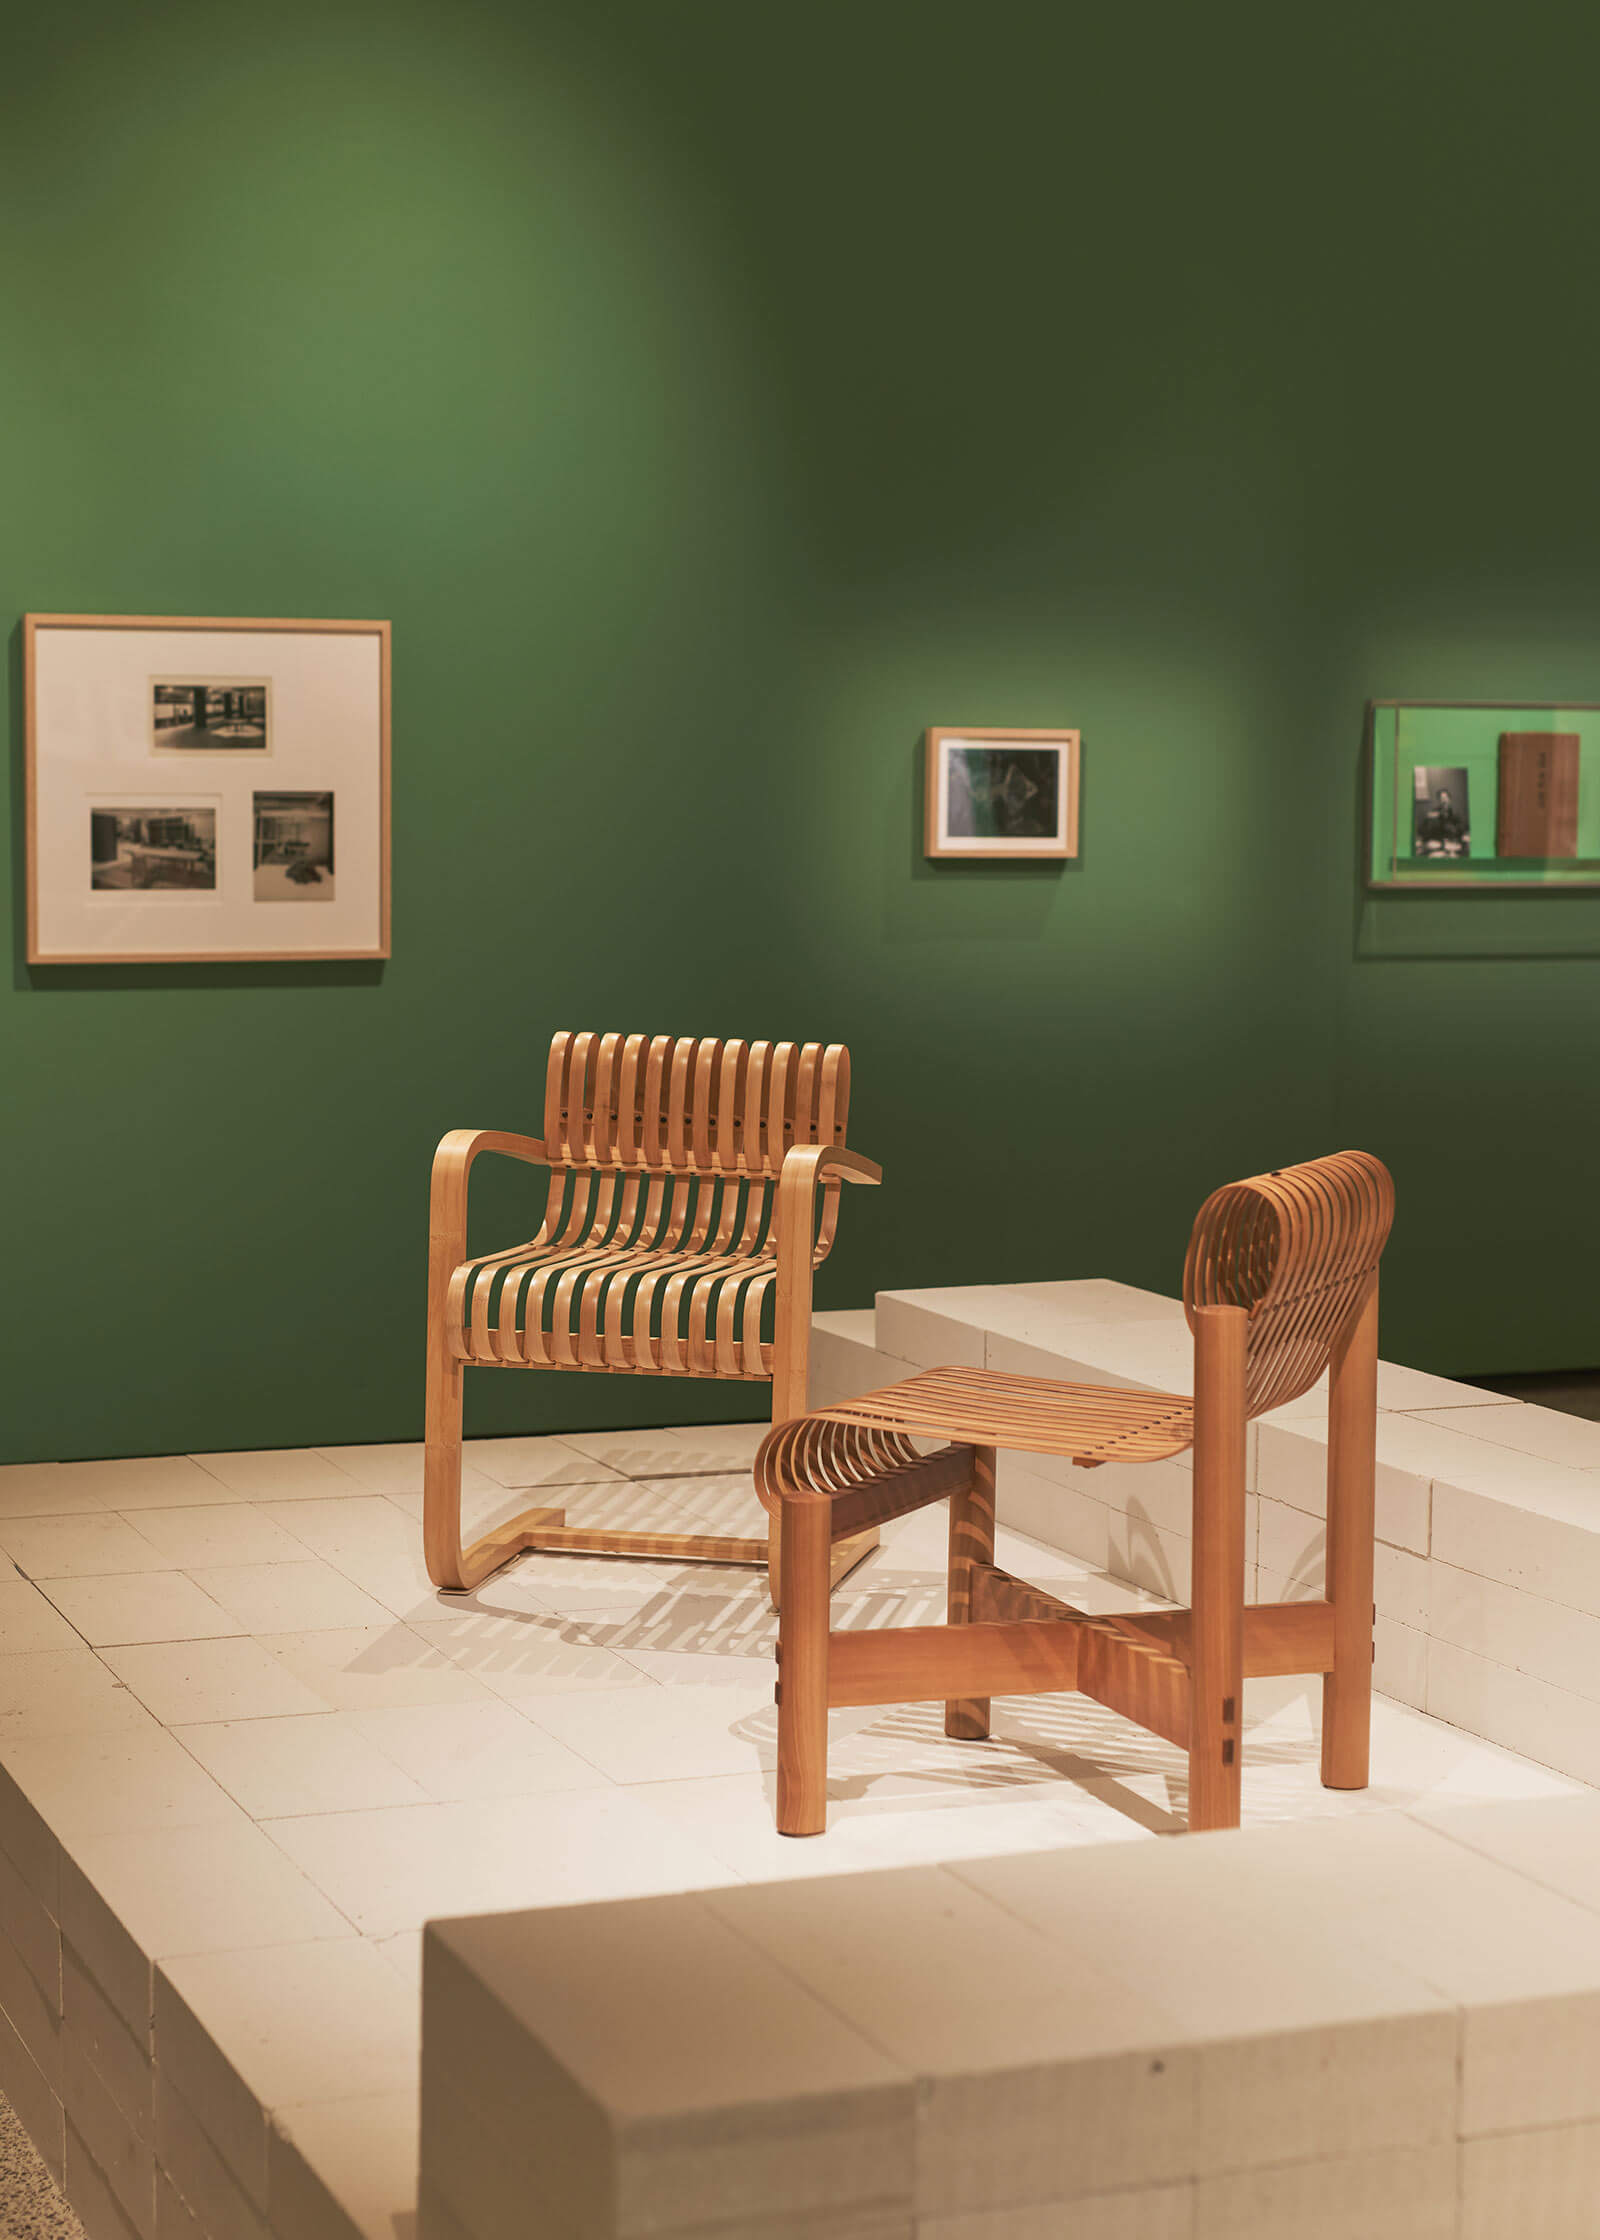 Charlotte Perriand - Exhibitions - The Design Edit